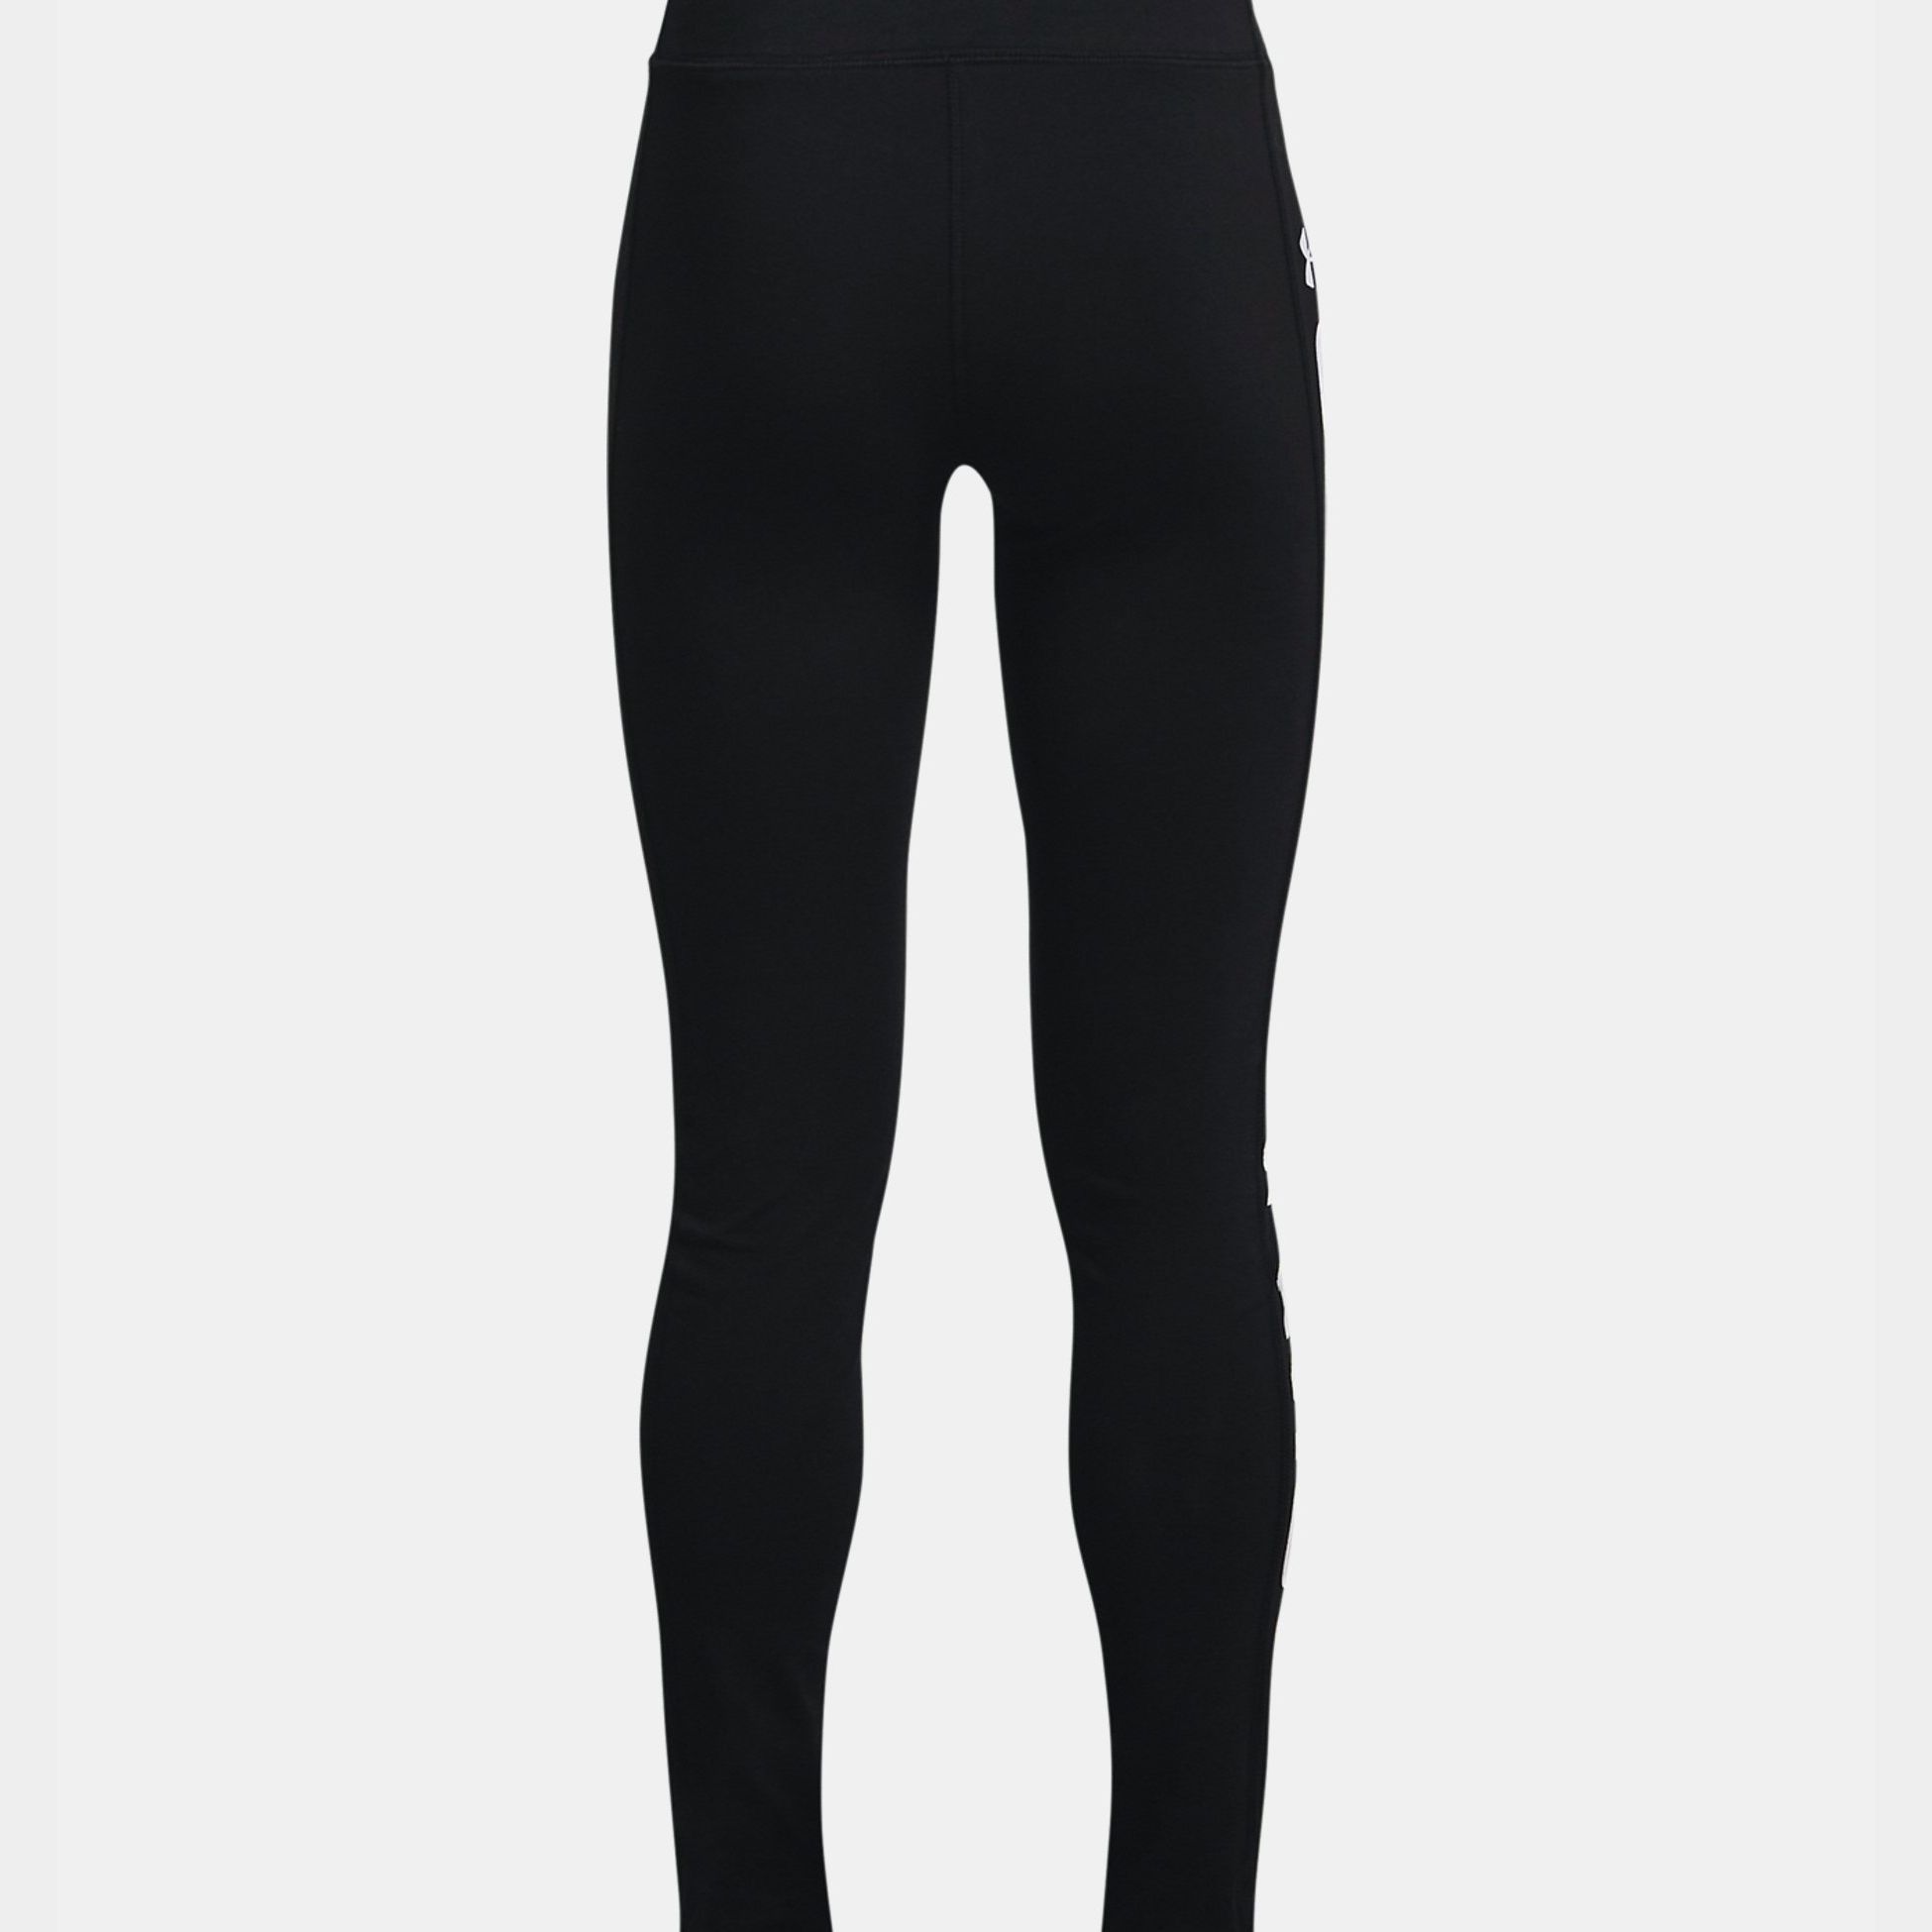 Under Armour Girls Active Leggings Grey MSRP $34.99 Brand New 